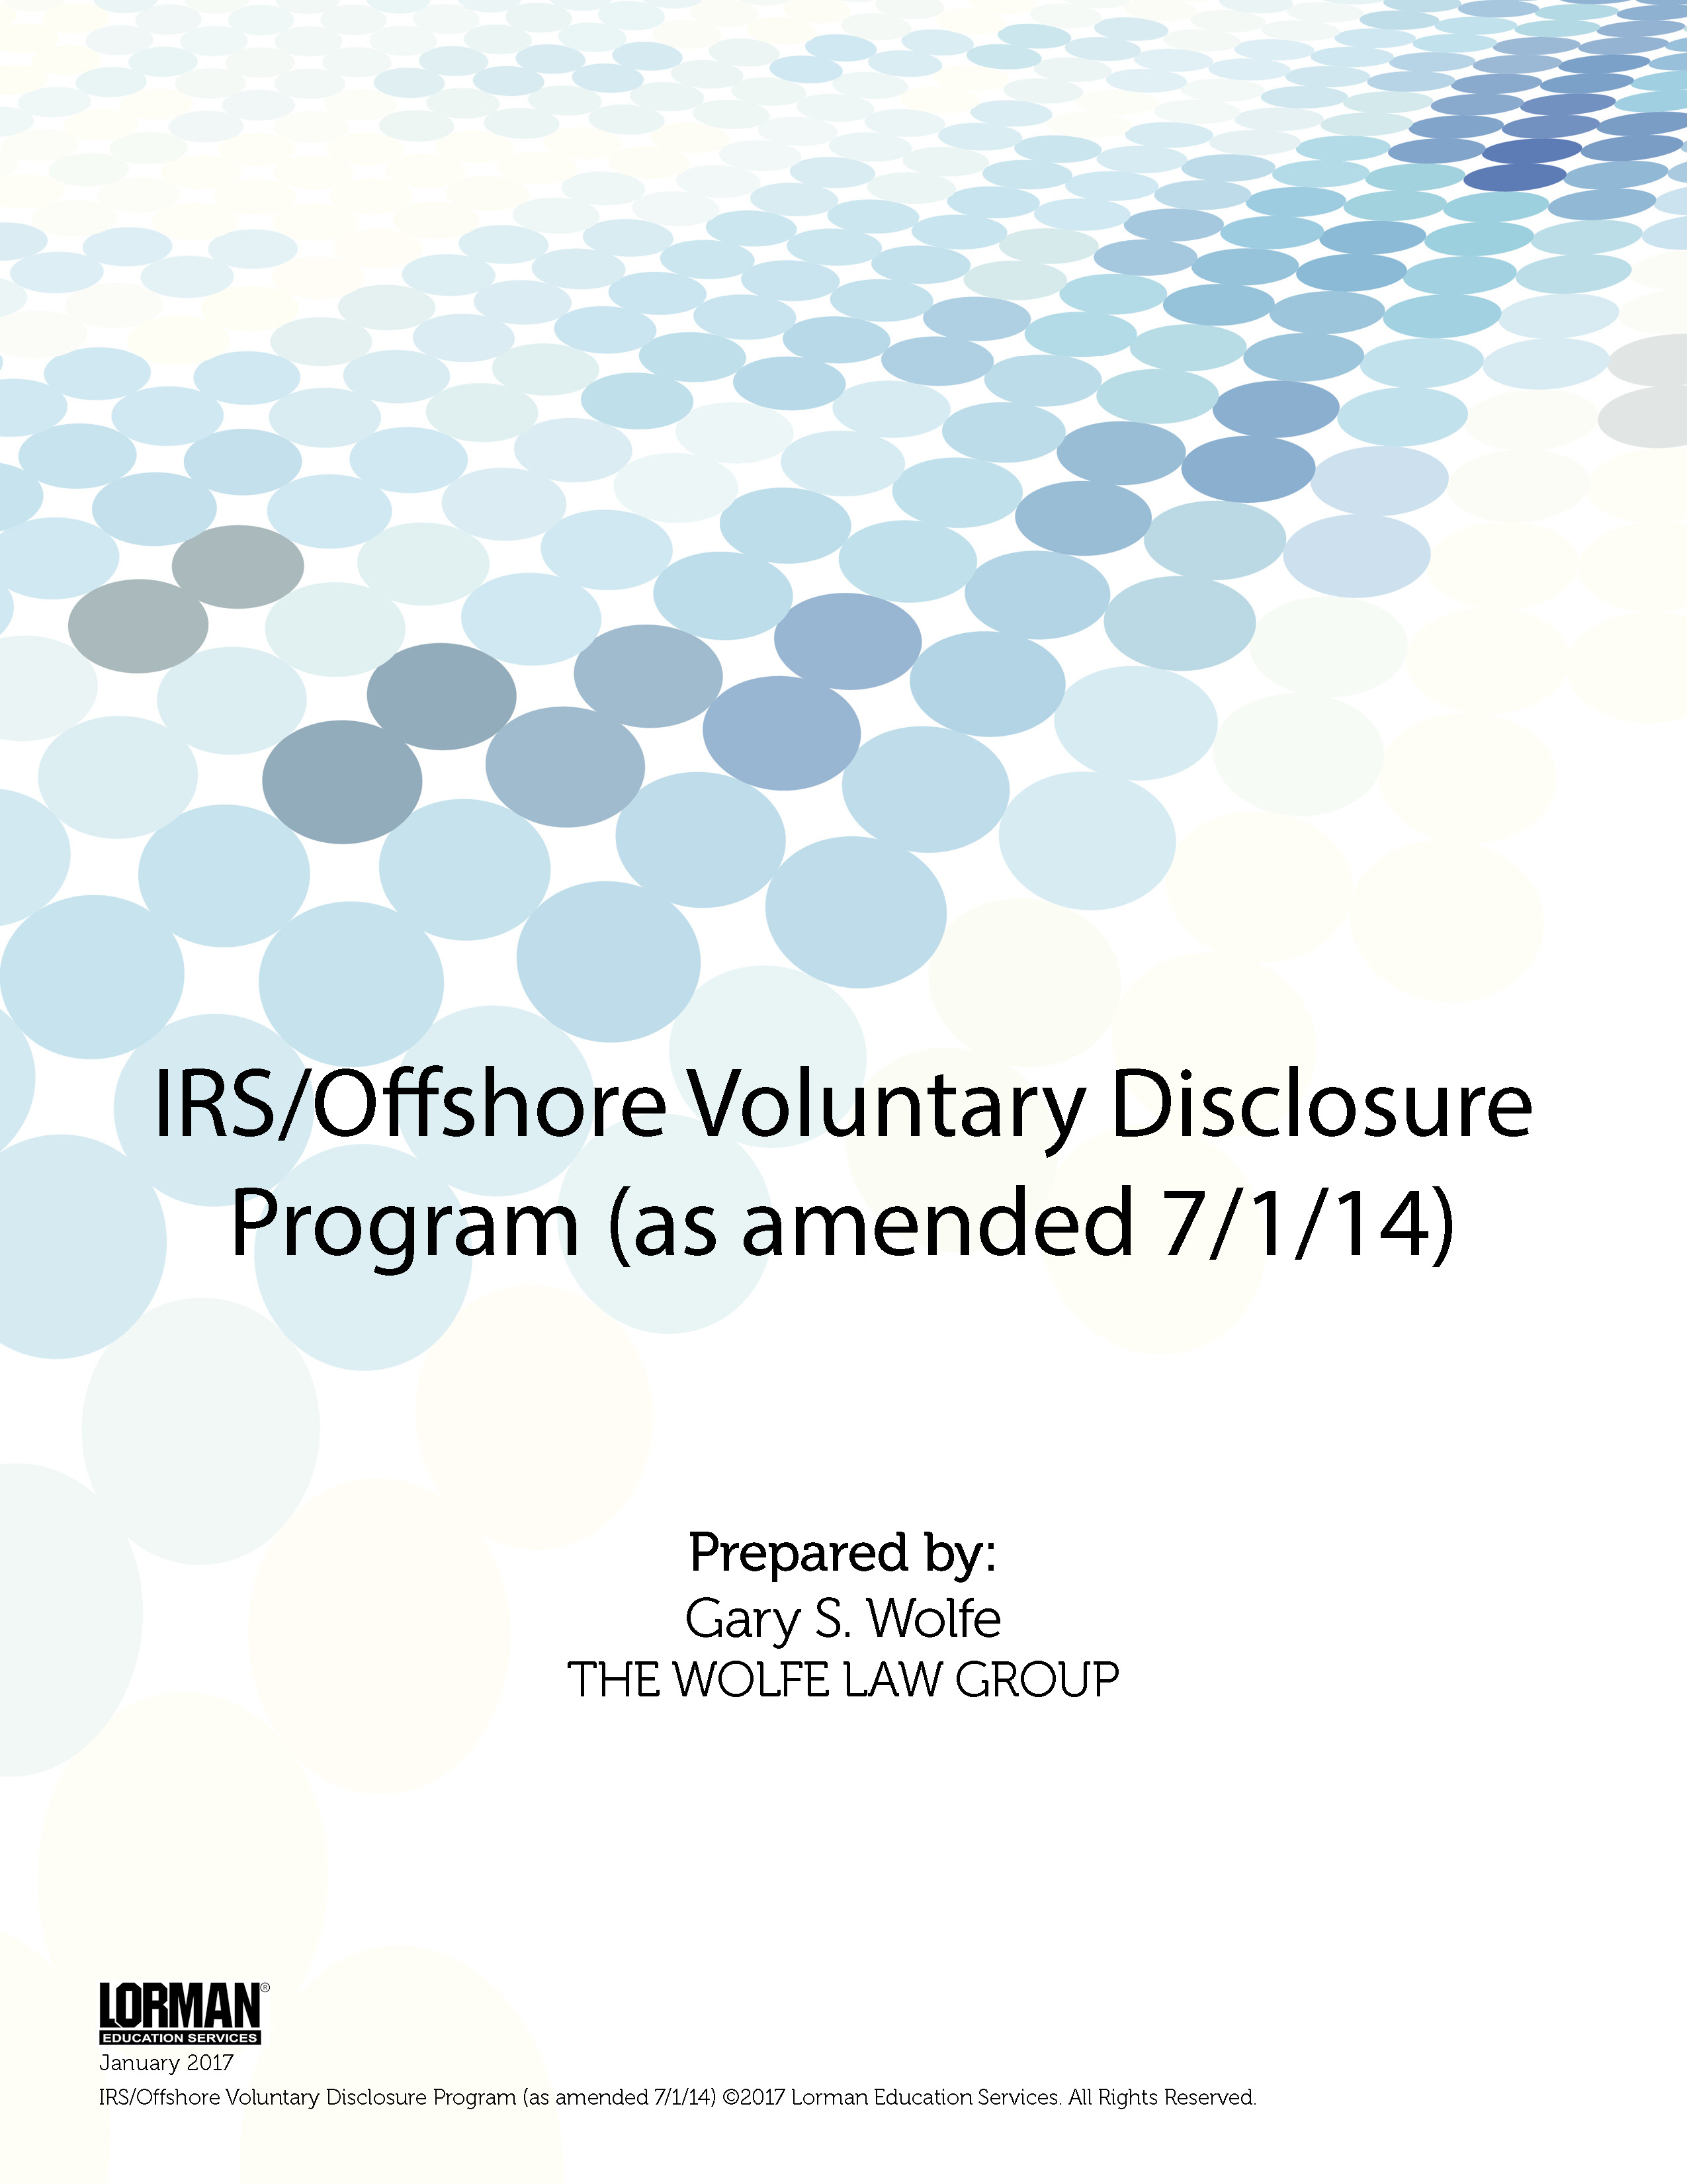 IRS Offshore Voluntary Disclosure Program (as amended 7-1-14)